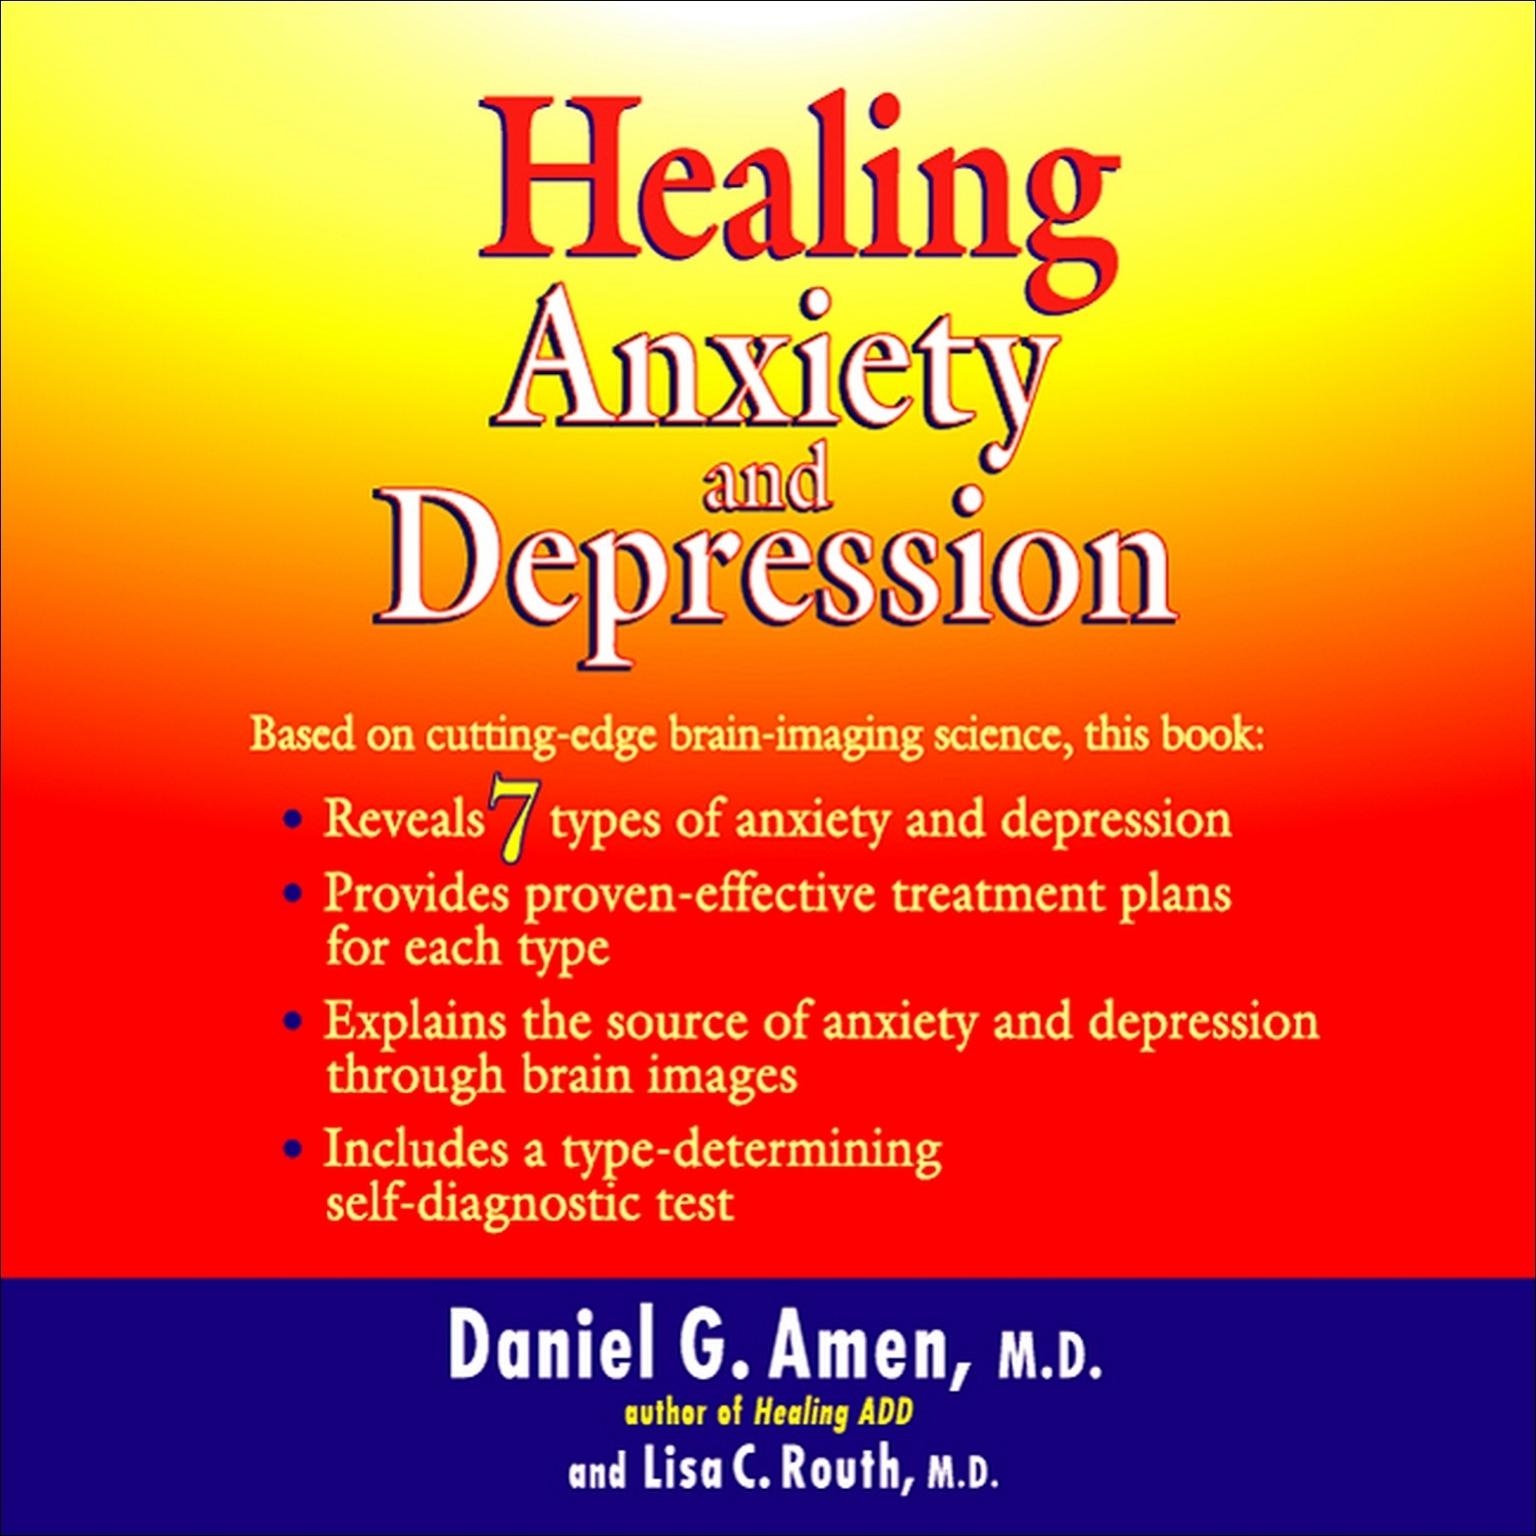 Healing Anxiety and Depression (Abridged) Audiobook, by Daniel G. Amen